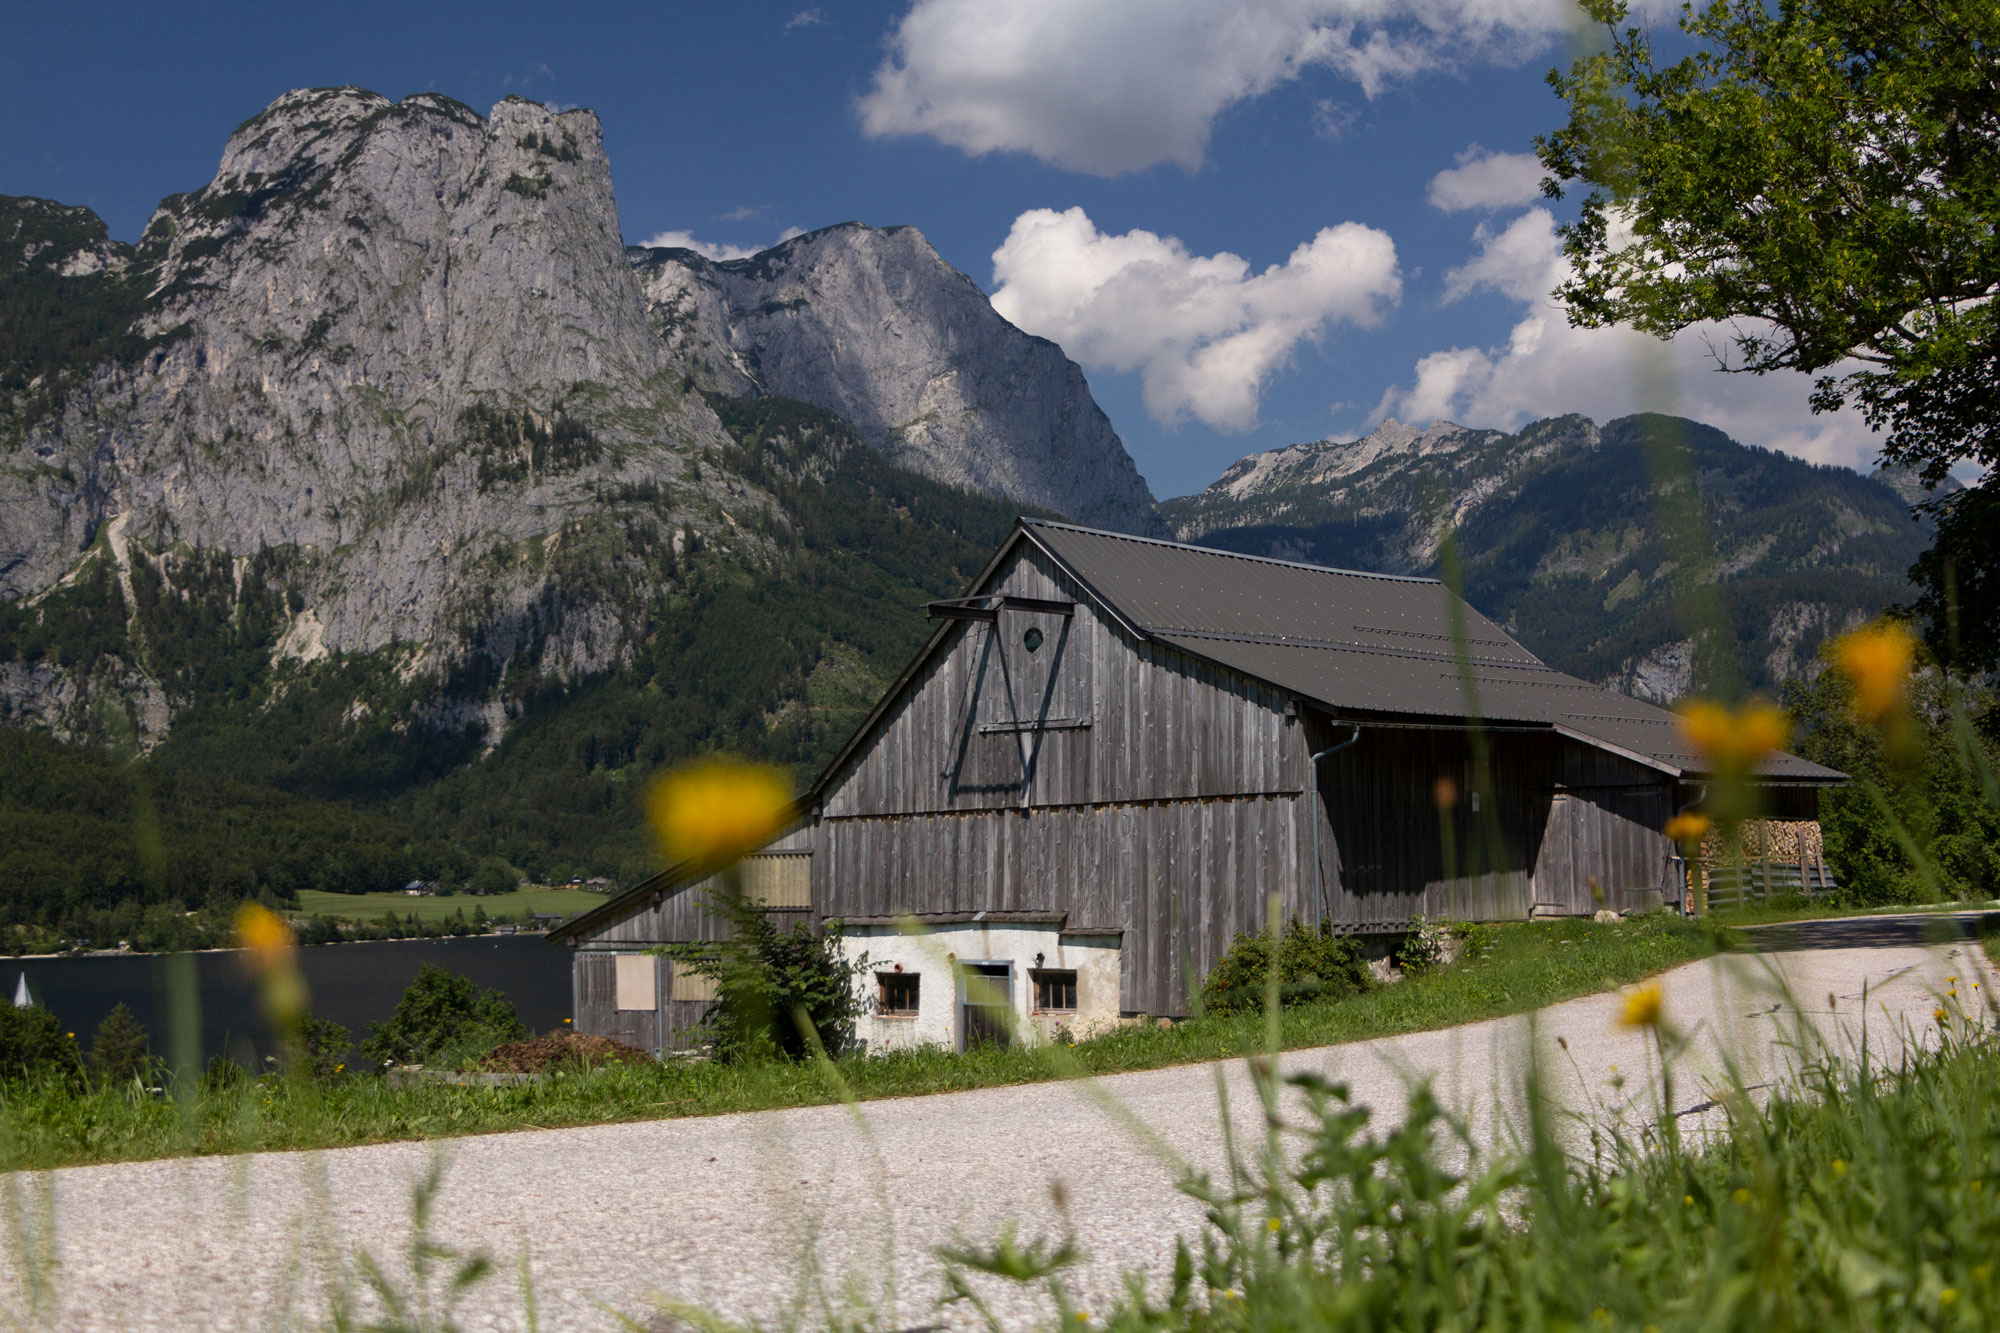 Landscape Maintenance Fund Grundlsee. How to motivate donations through film 7